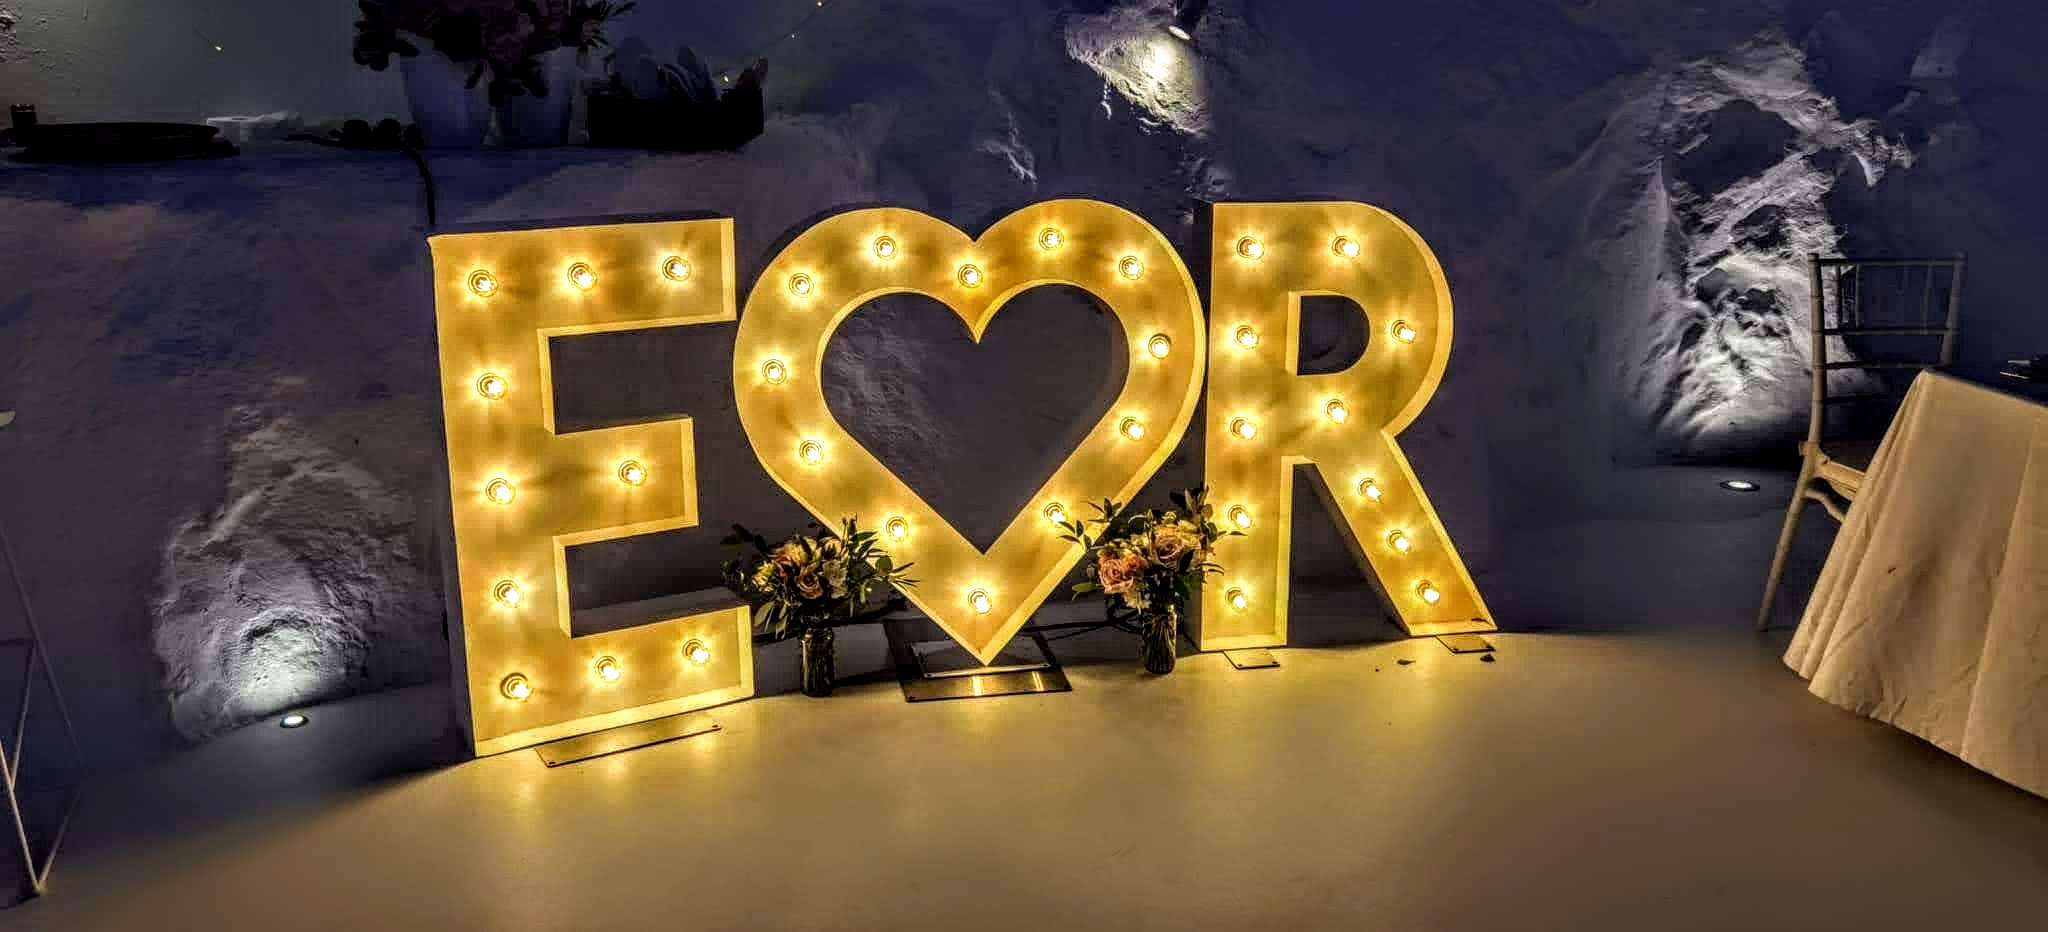 Marquee Illuminated Letters - Light up Letters - Wedding Love letters